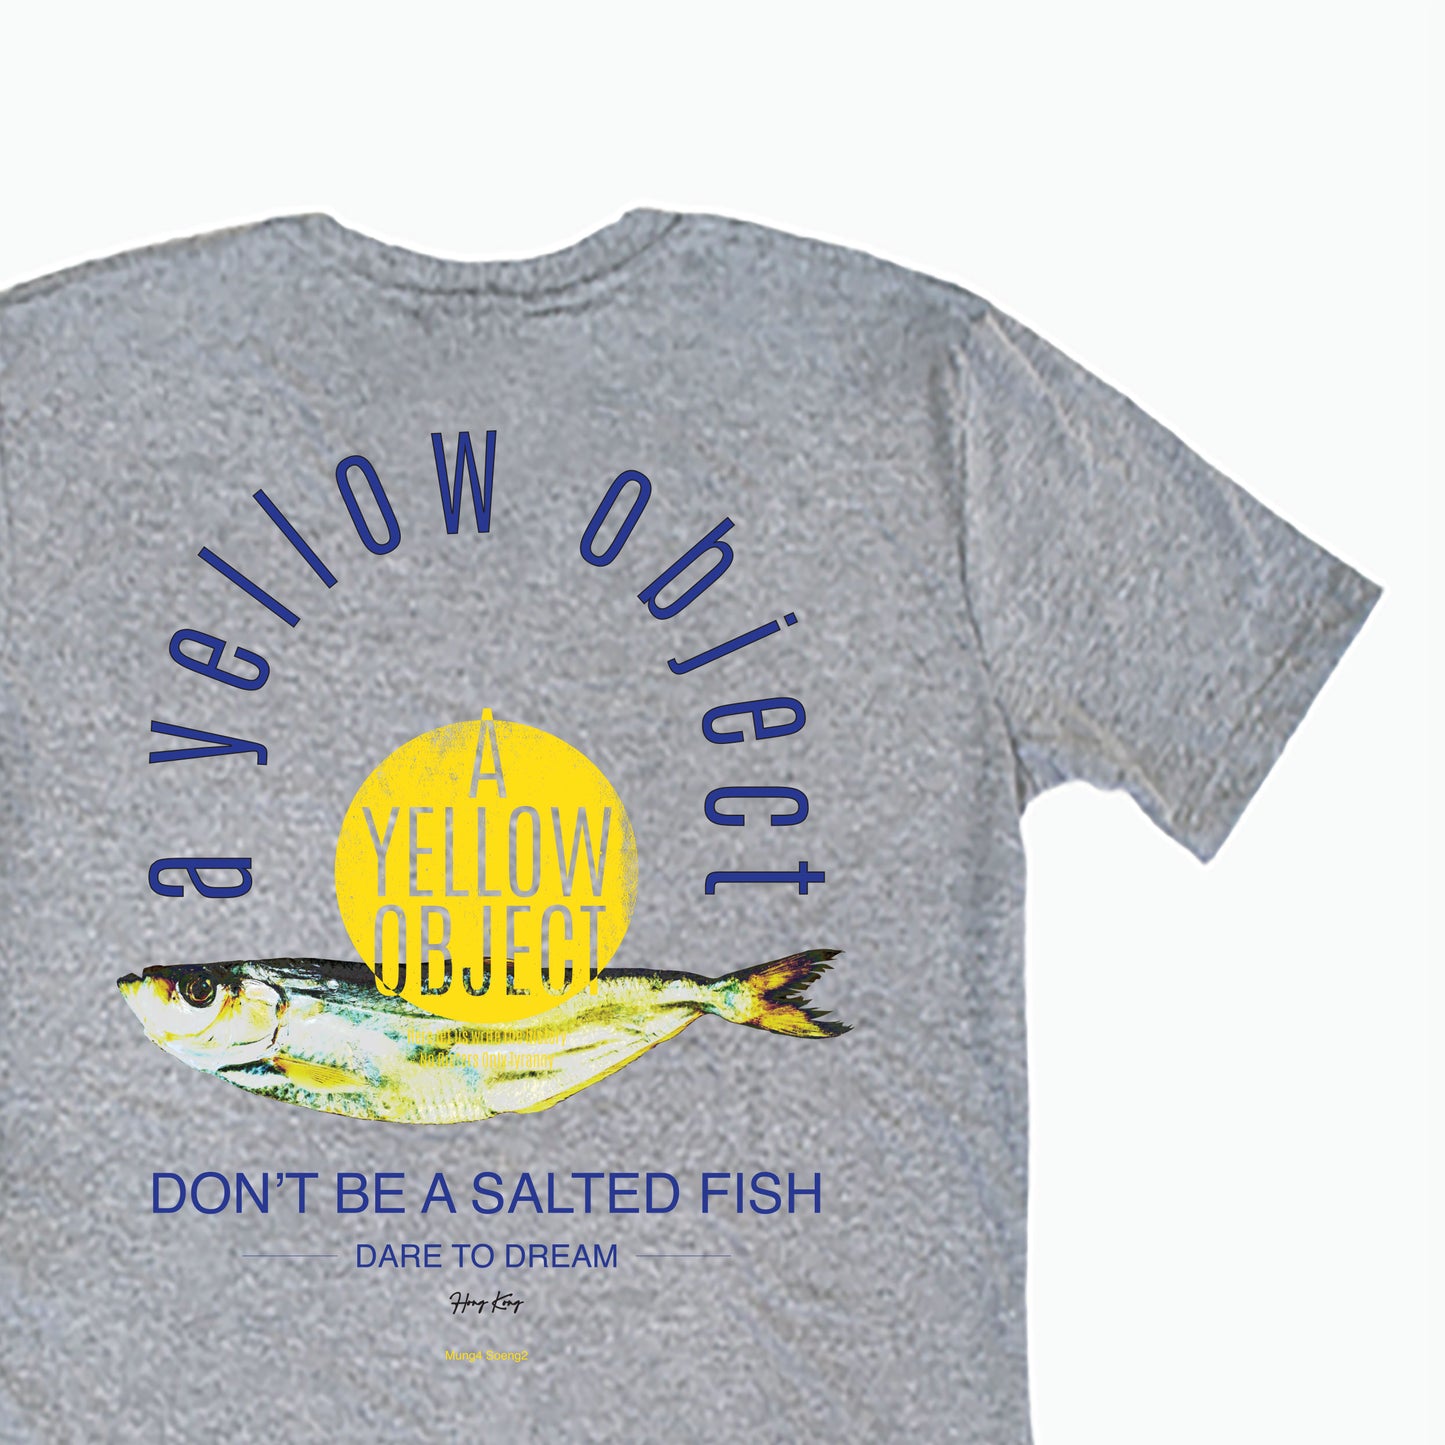 Salted Fish T-Shirt (Gray) - a yellow object